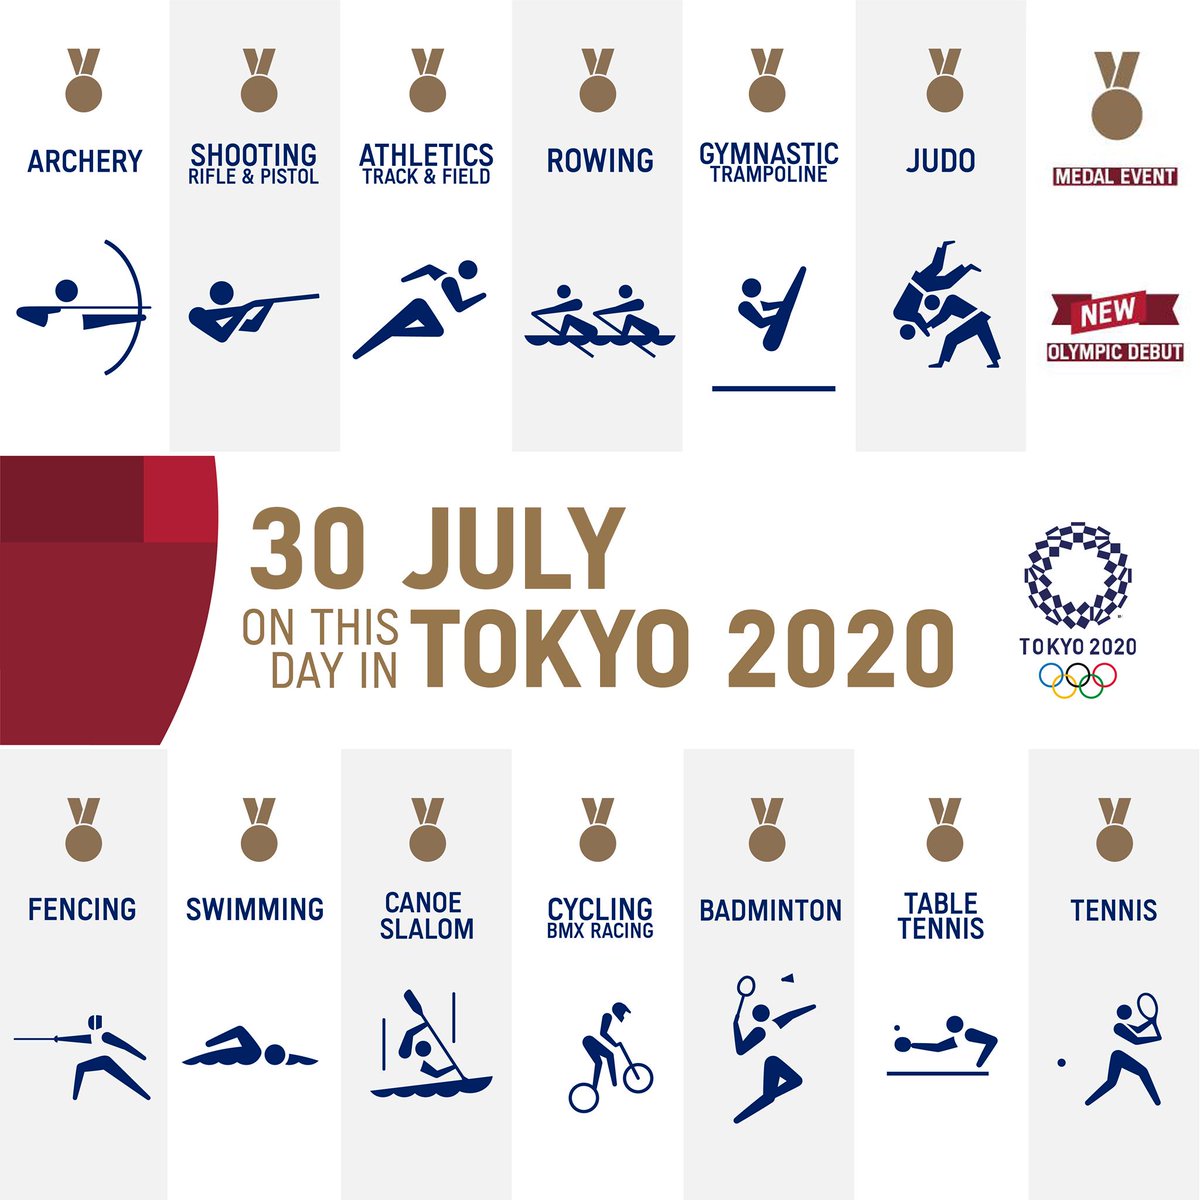 Olympic schedule 2021